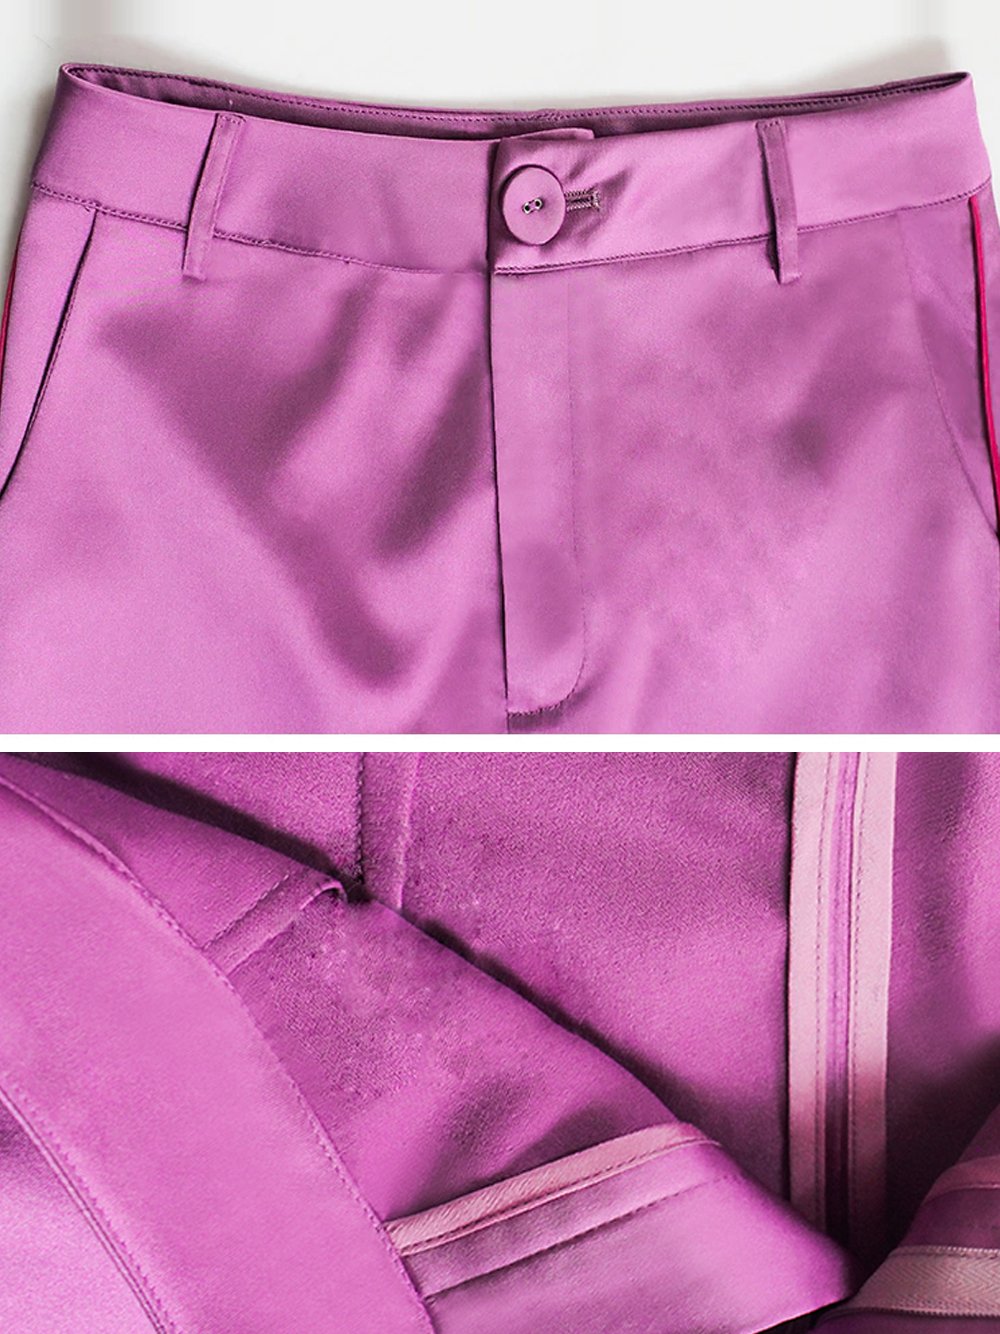 GF Double-breasted Satin Blazer + Pants Matching Set in Pink